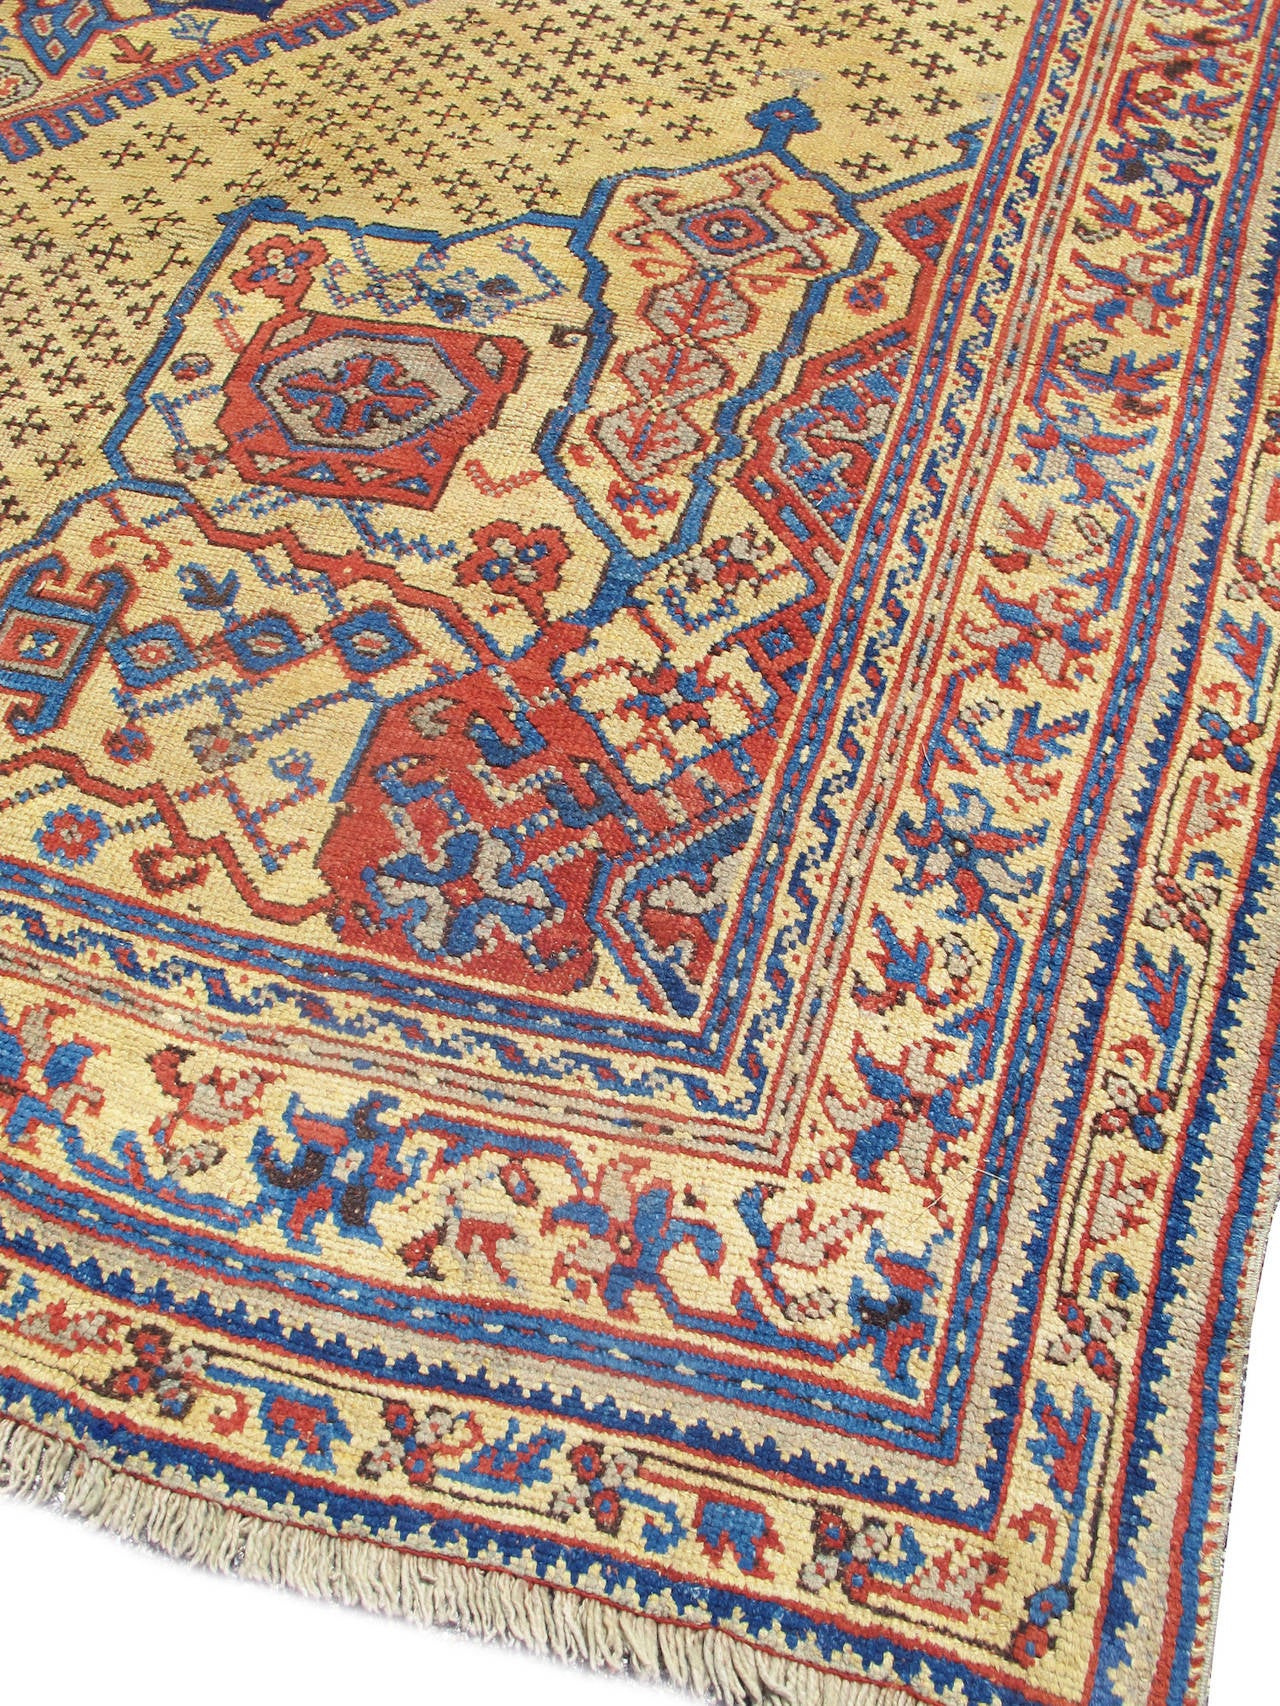 This palace-sized Oushak carpet represents the end of the Ottoman classical tradition of medallion carpets. Perhaps woven in the vicinity of Izmir or another western Anatolian weaving center more removed from Oushak itself, the lobed medallions used